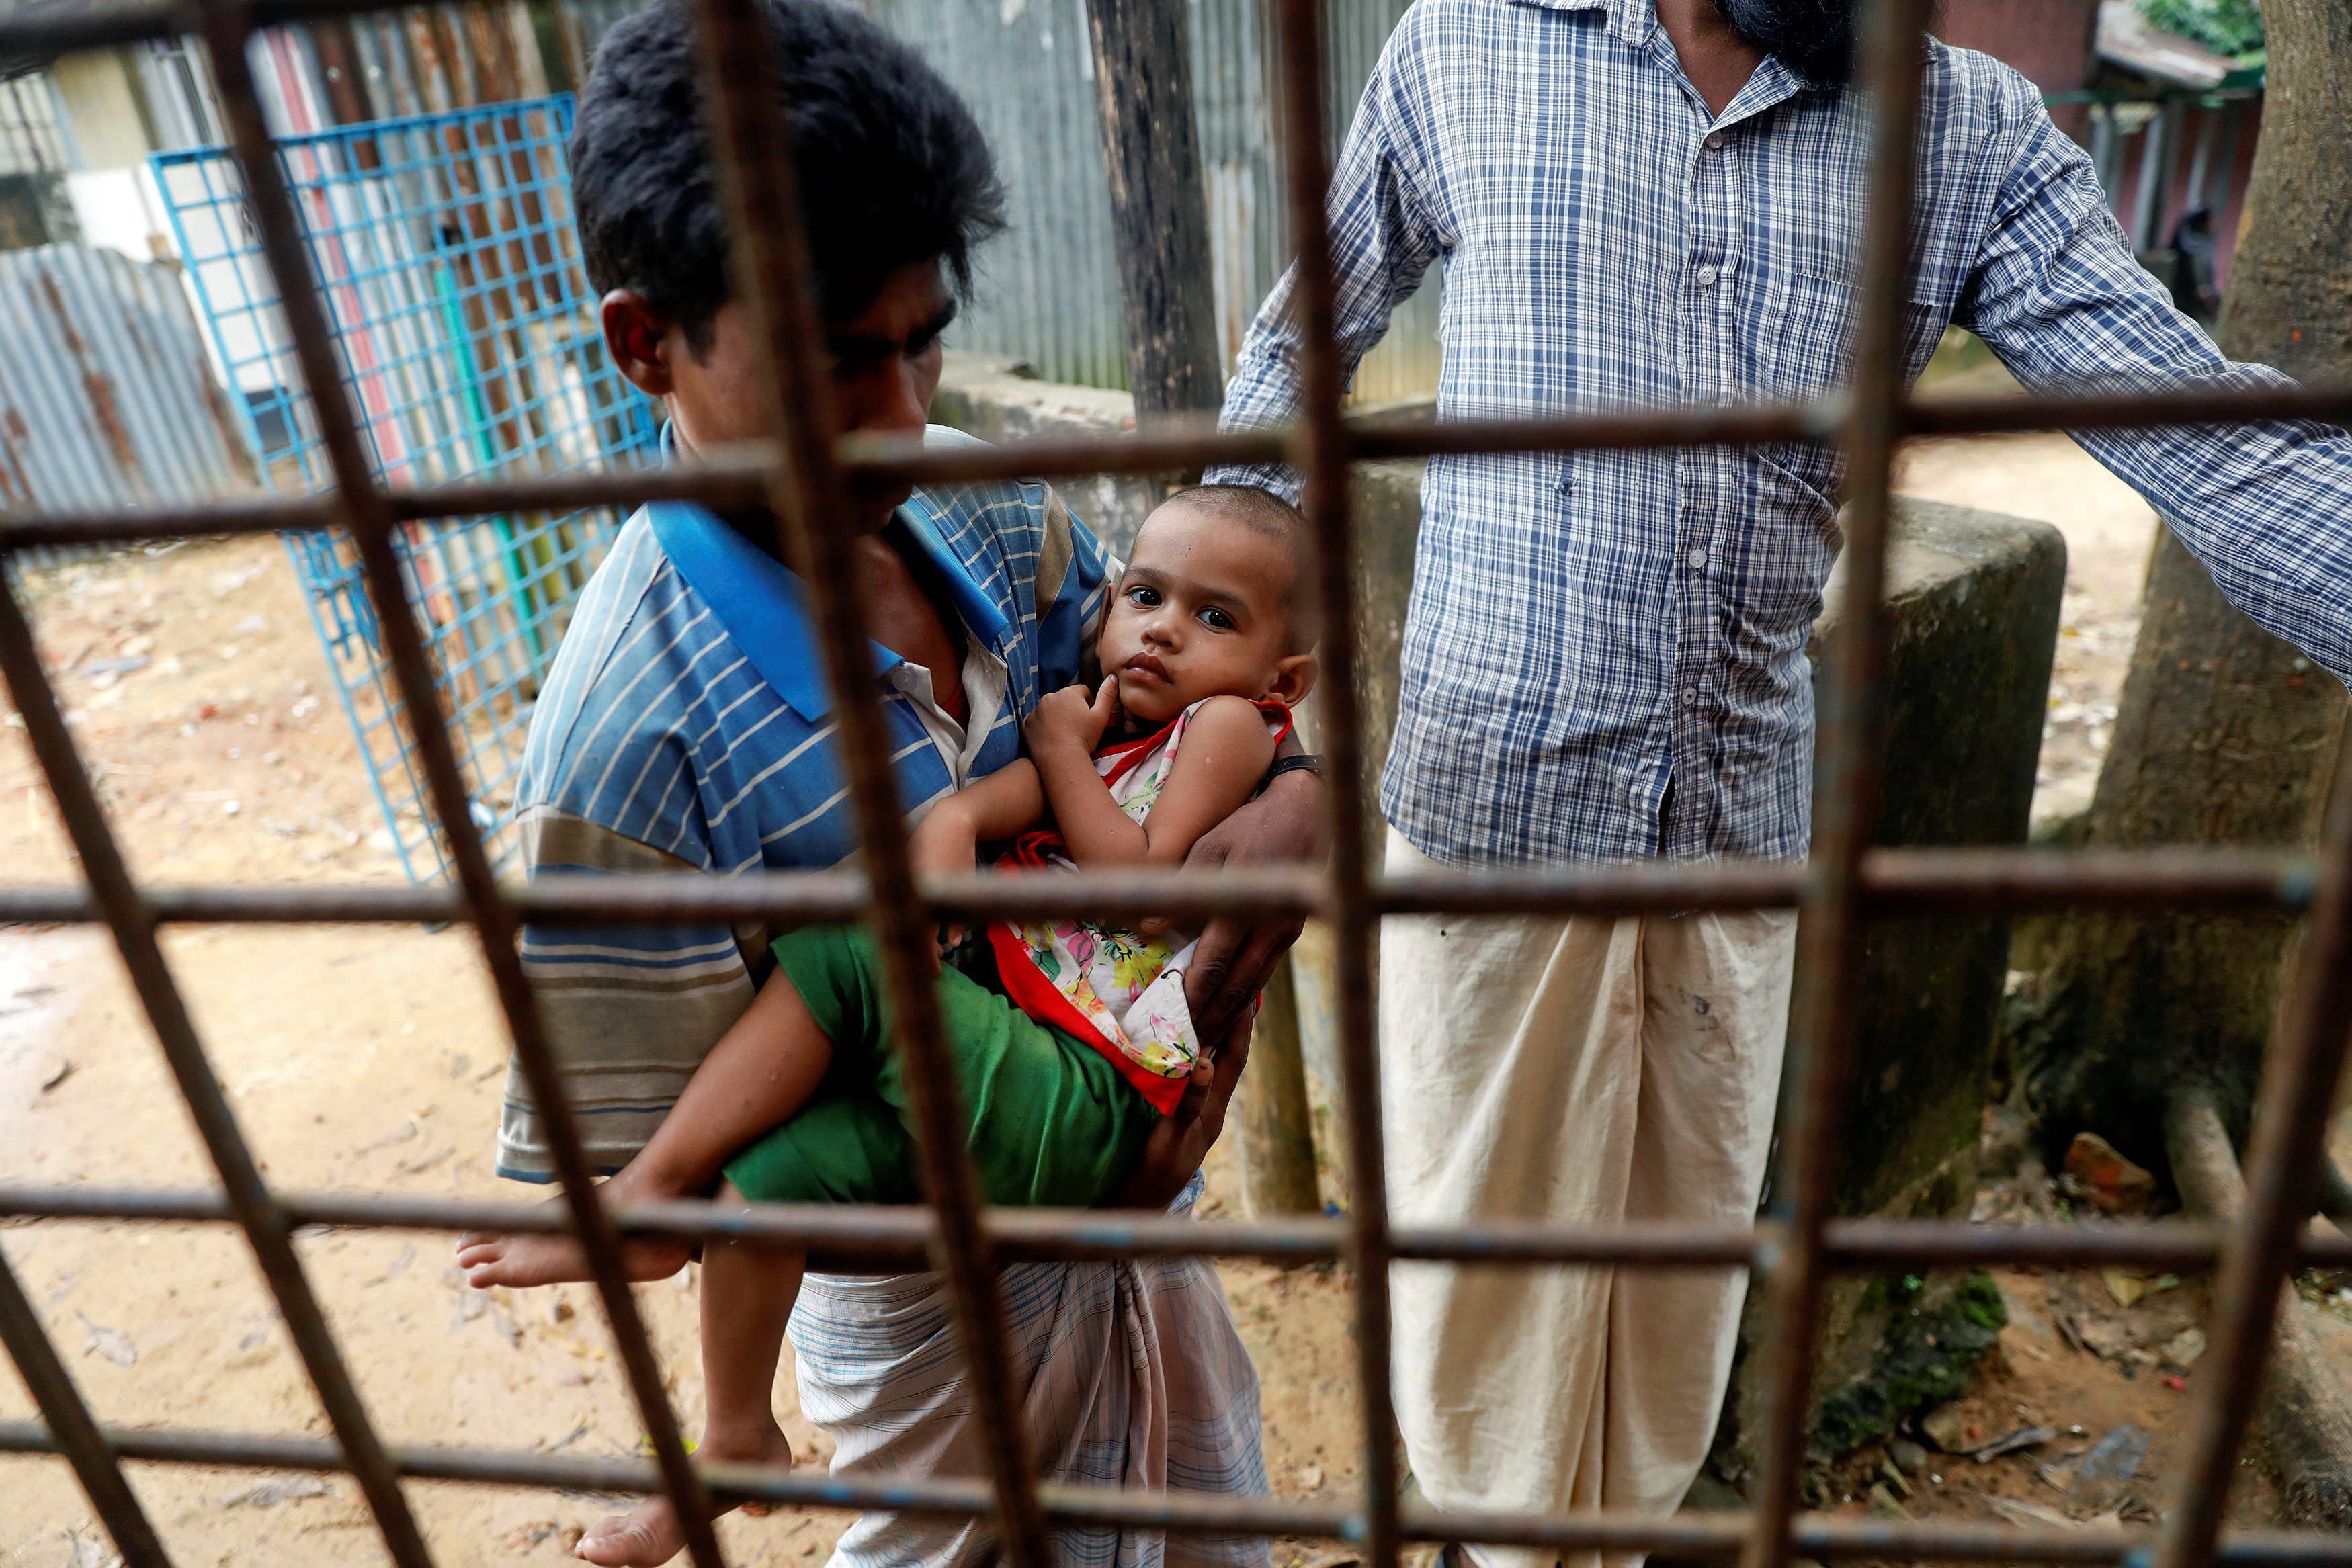 In pictures: Cholera vaccination for Rohingya refugees in Bangladesh